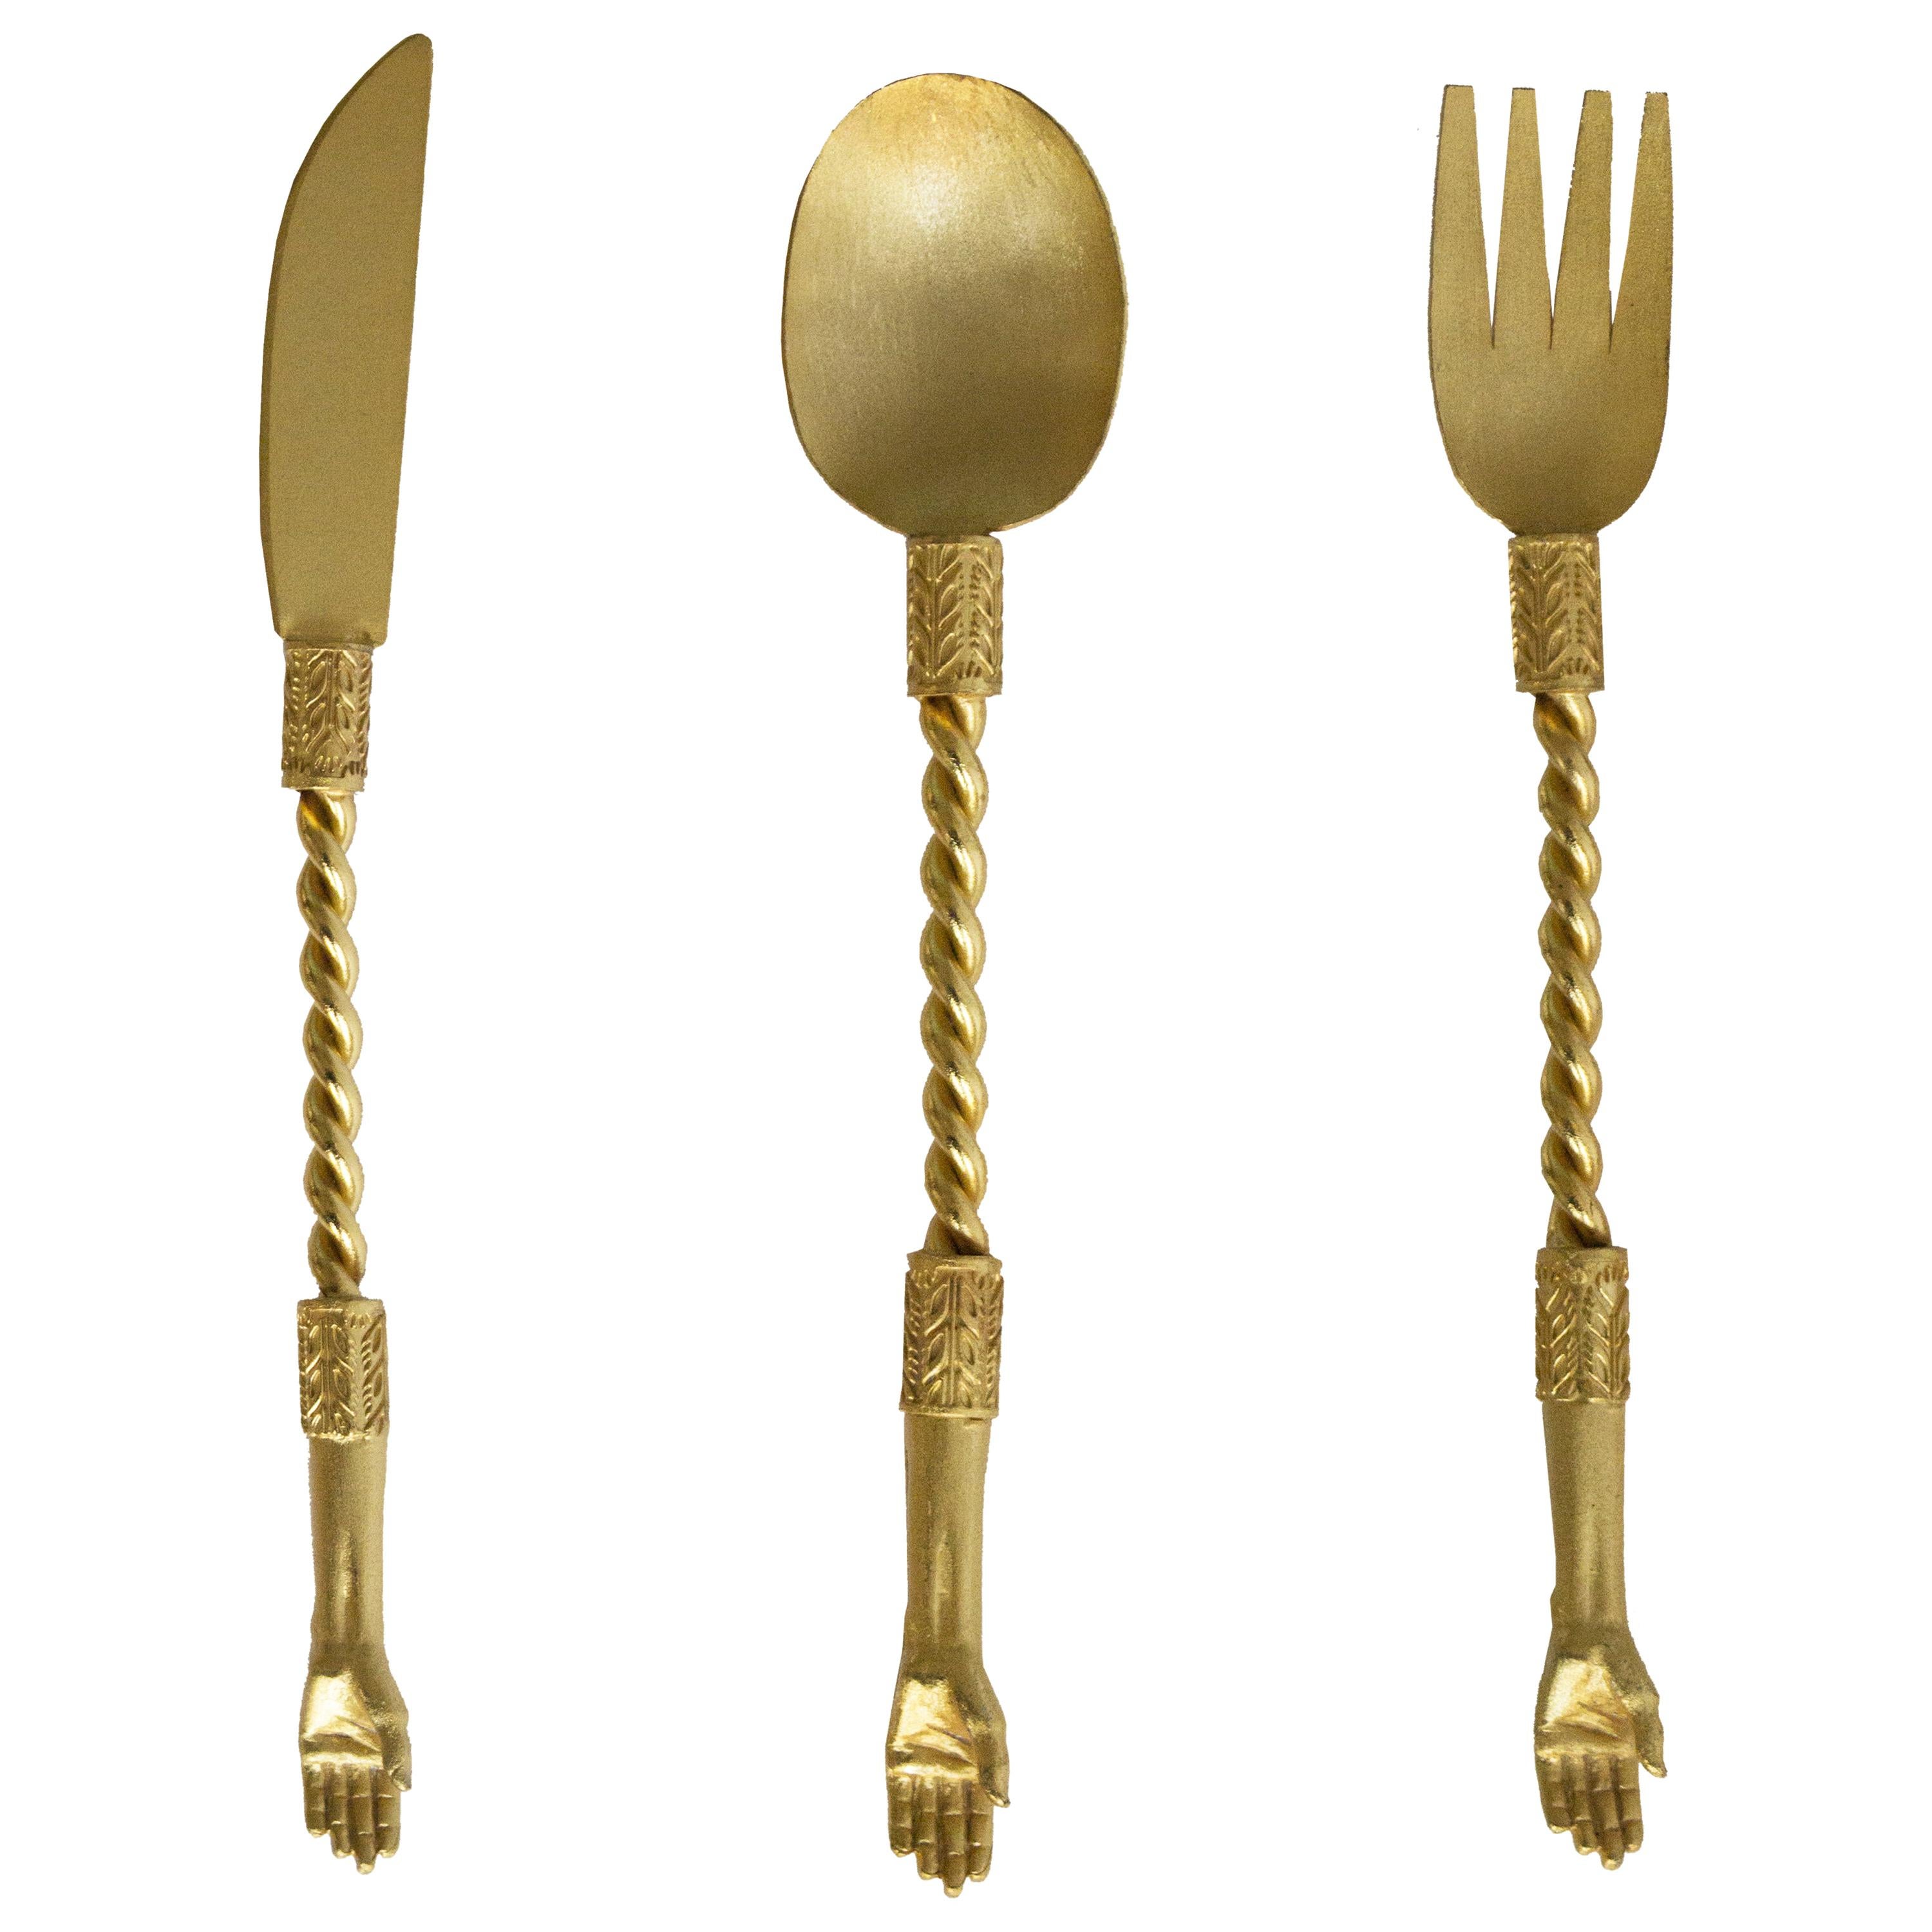 Contemporary Hand Cutlery Servers Golden Plated Handcrafted Italy Natalia Criado For Sale